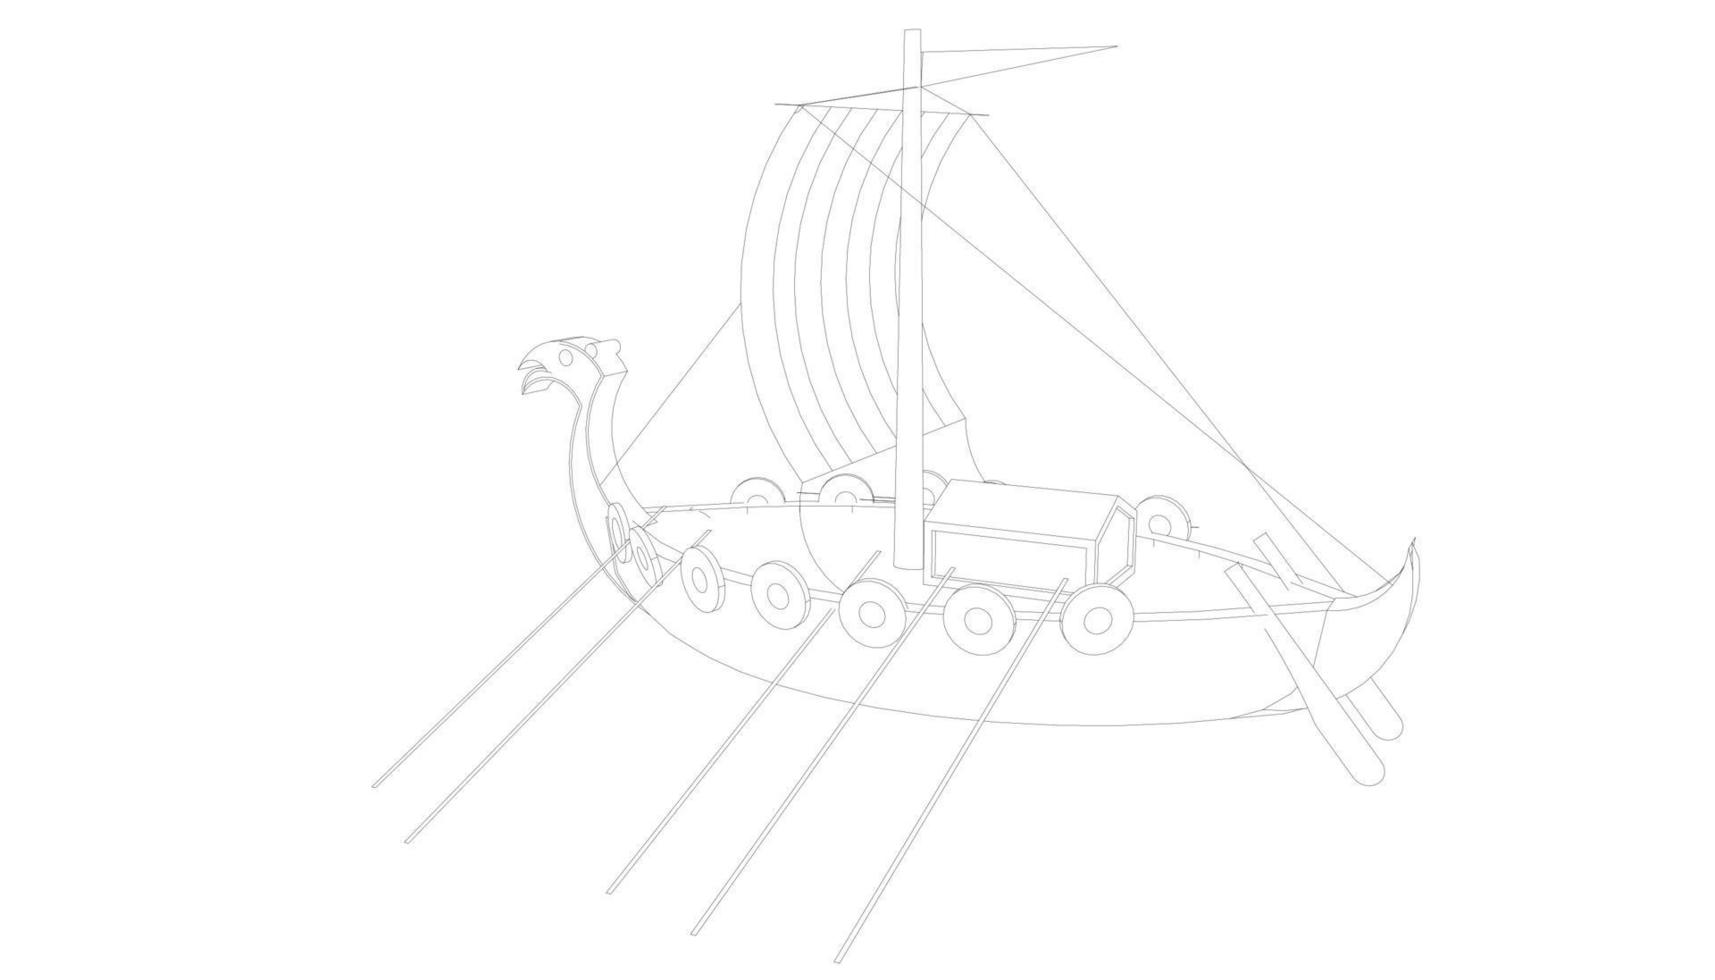 lineart style classic sailboat vector